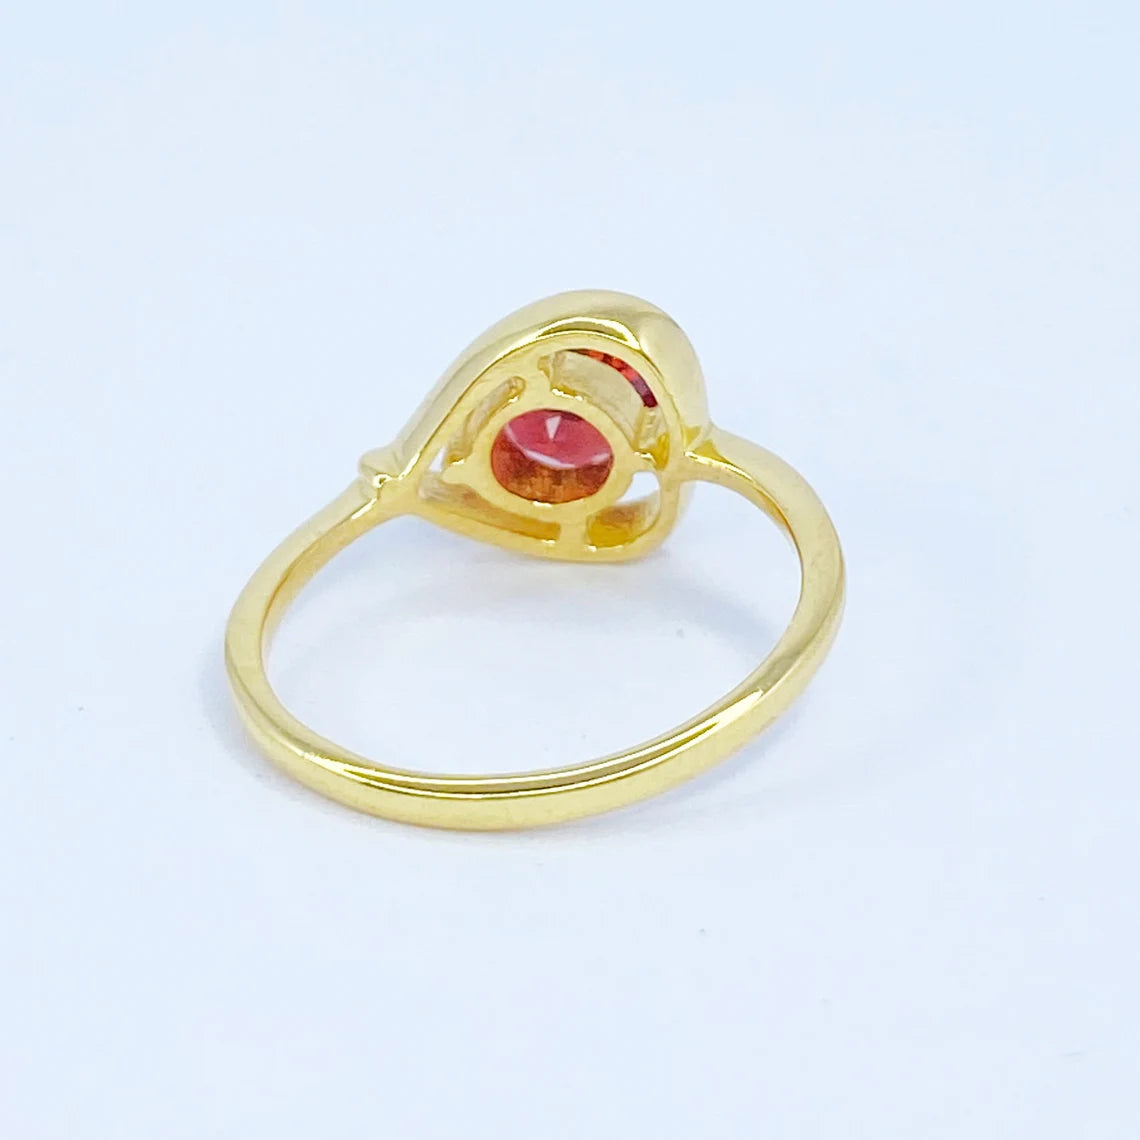 Gothic Round Garnet Ring, Silver And Gold Gemstone Ring, January Birthstone Jewelry For Her, Unusual Four Dots Stacking Ring